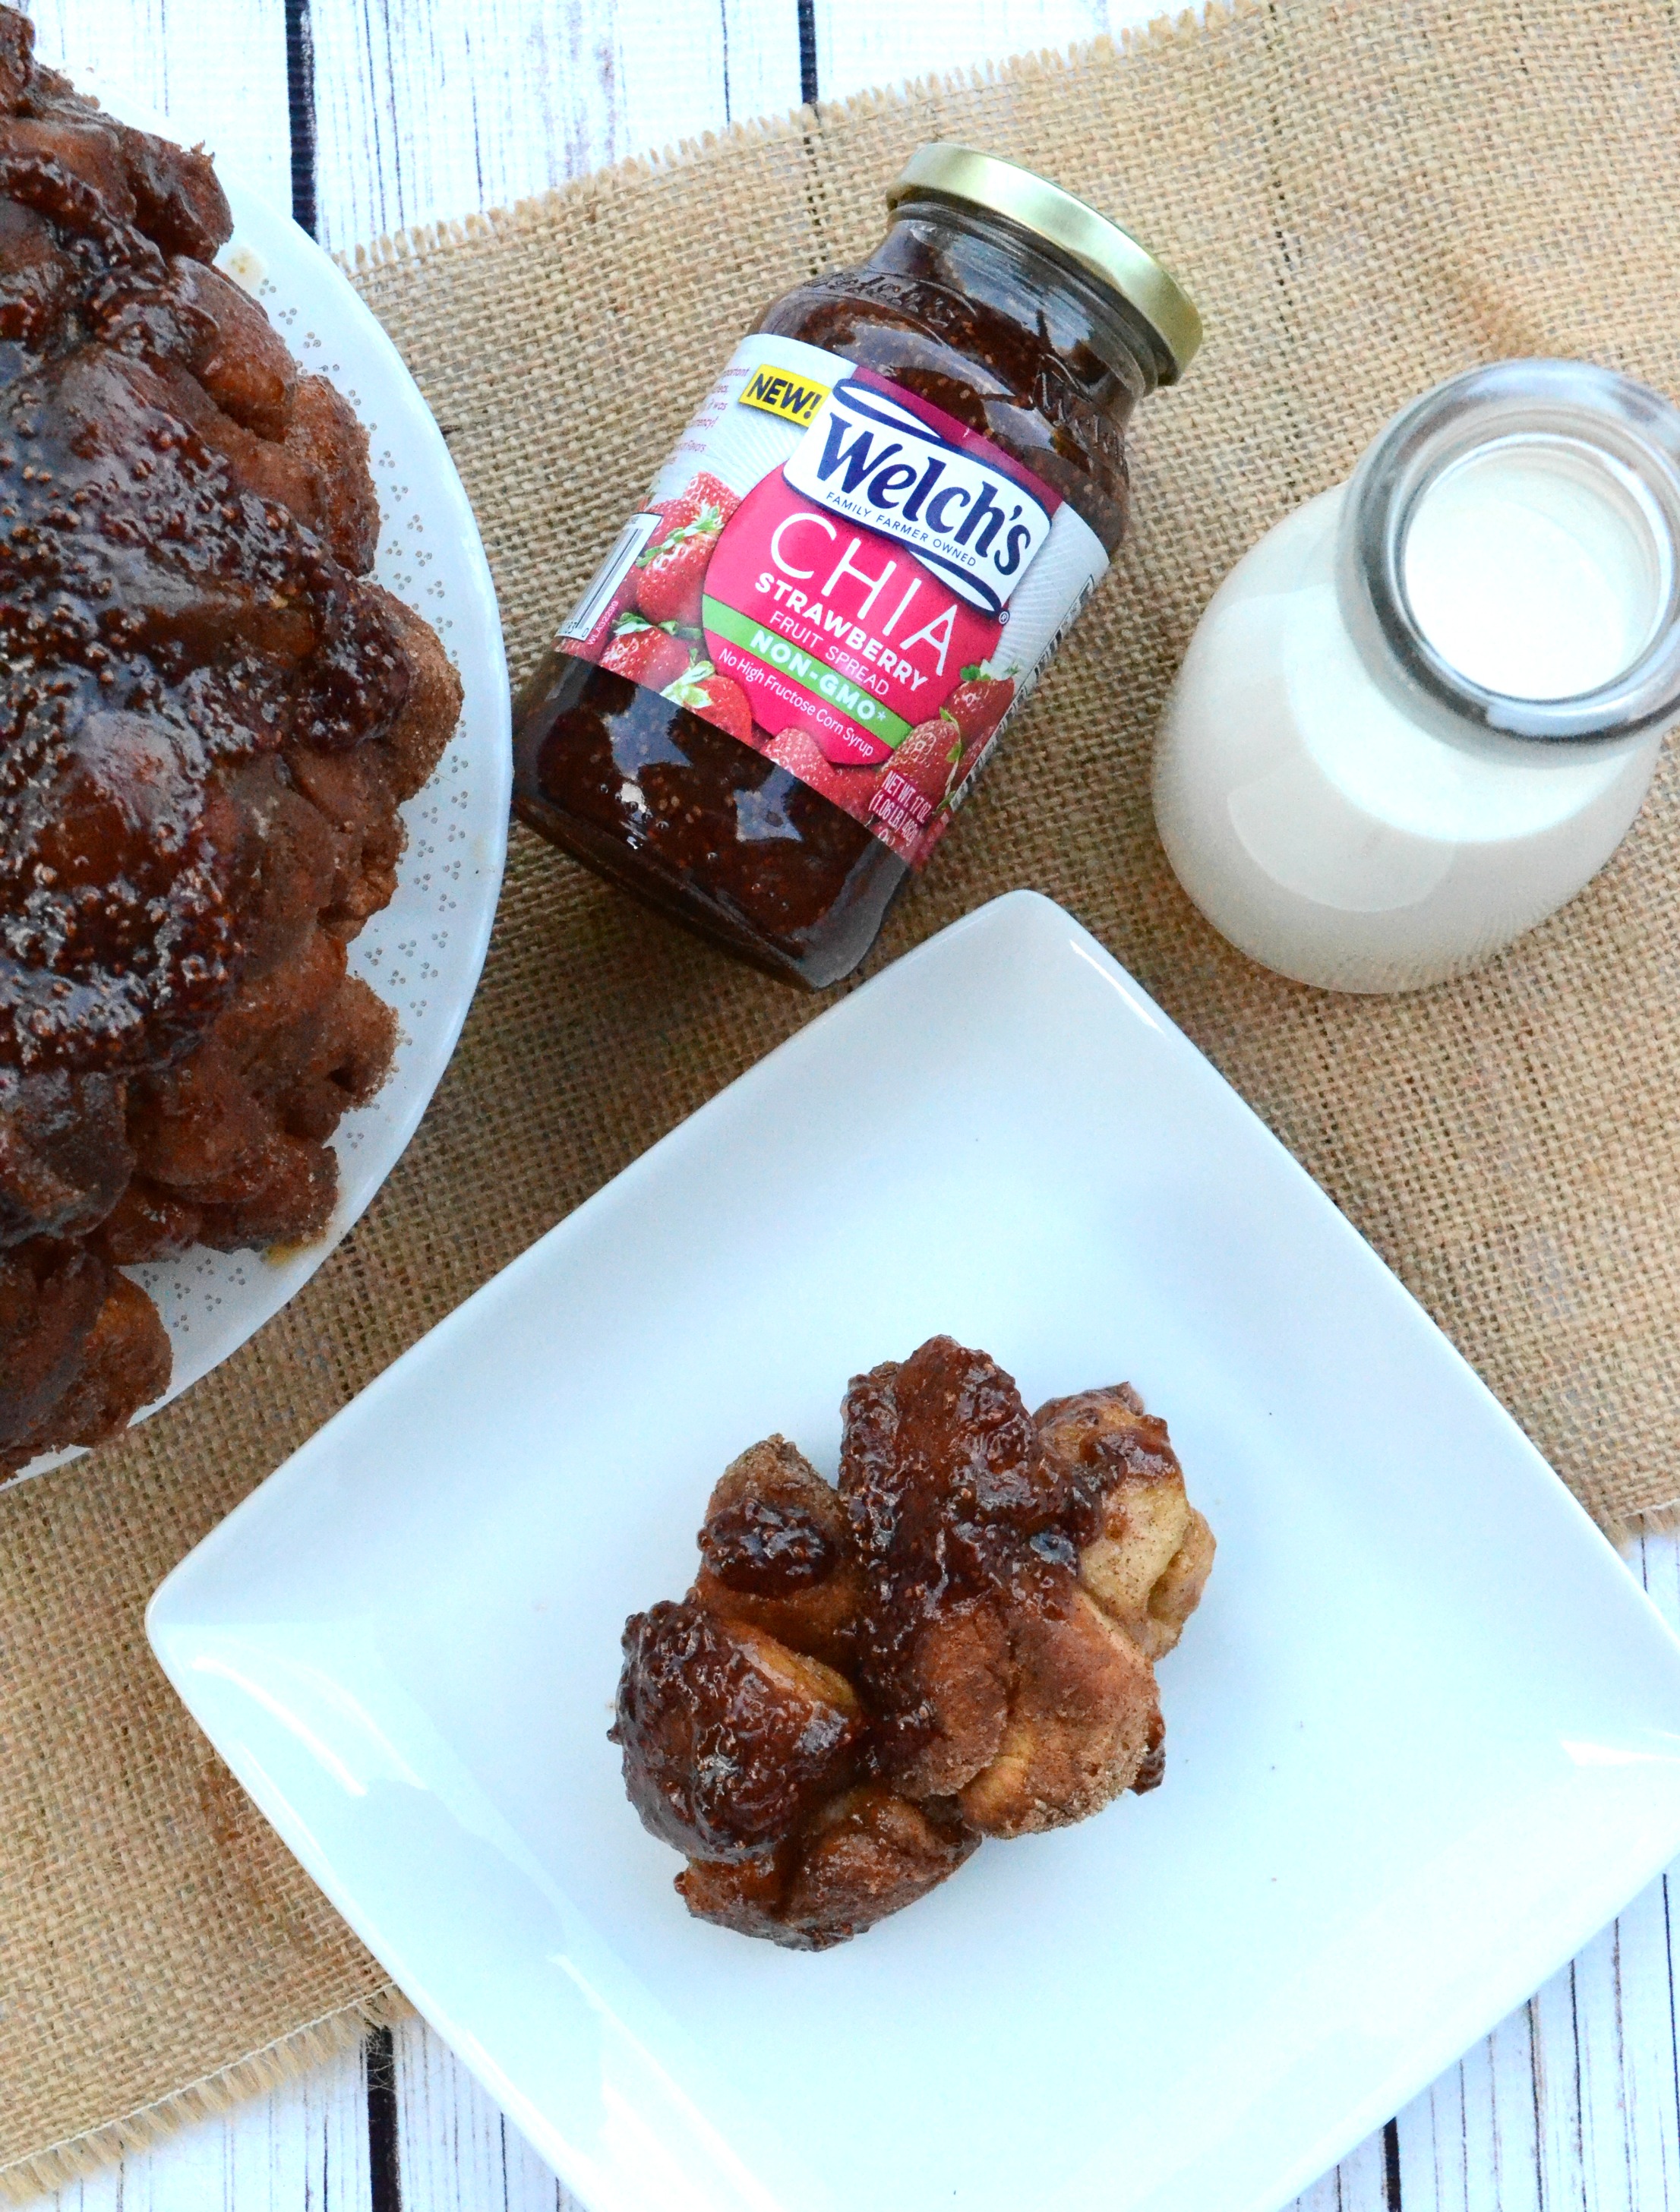 Everybody loves the classic PB& J sandwich, and this revamped ooey gooey Peanut Butter and Jellly Monkey Bread covered in Welch's Strawberry Chia spread is the perfect way to enjoy a timeless favorite! #Welchs #WelchsChia @Publix